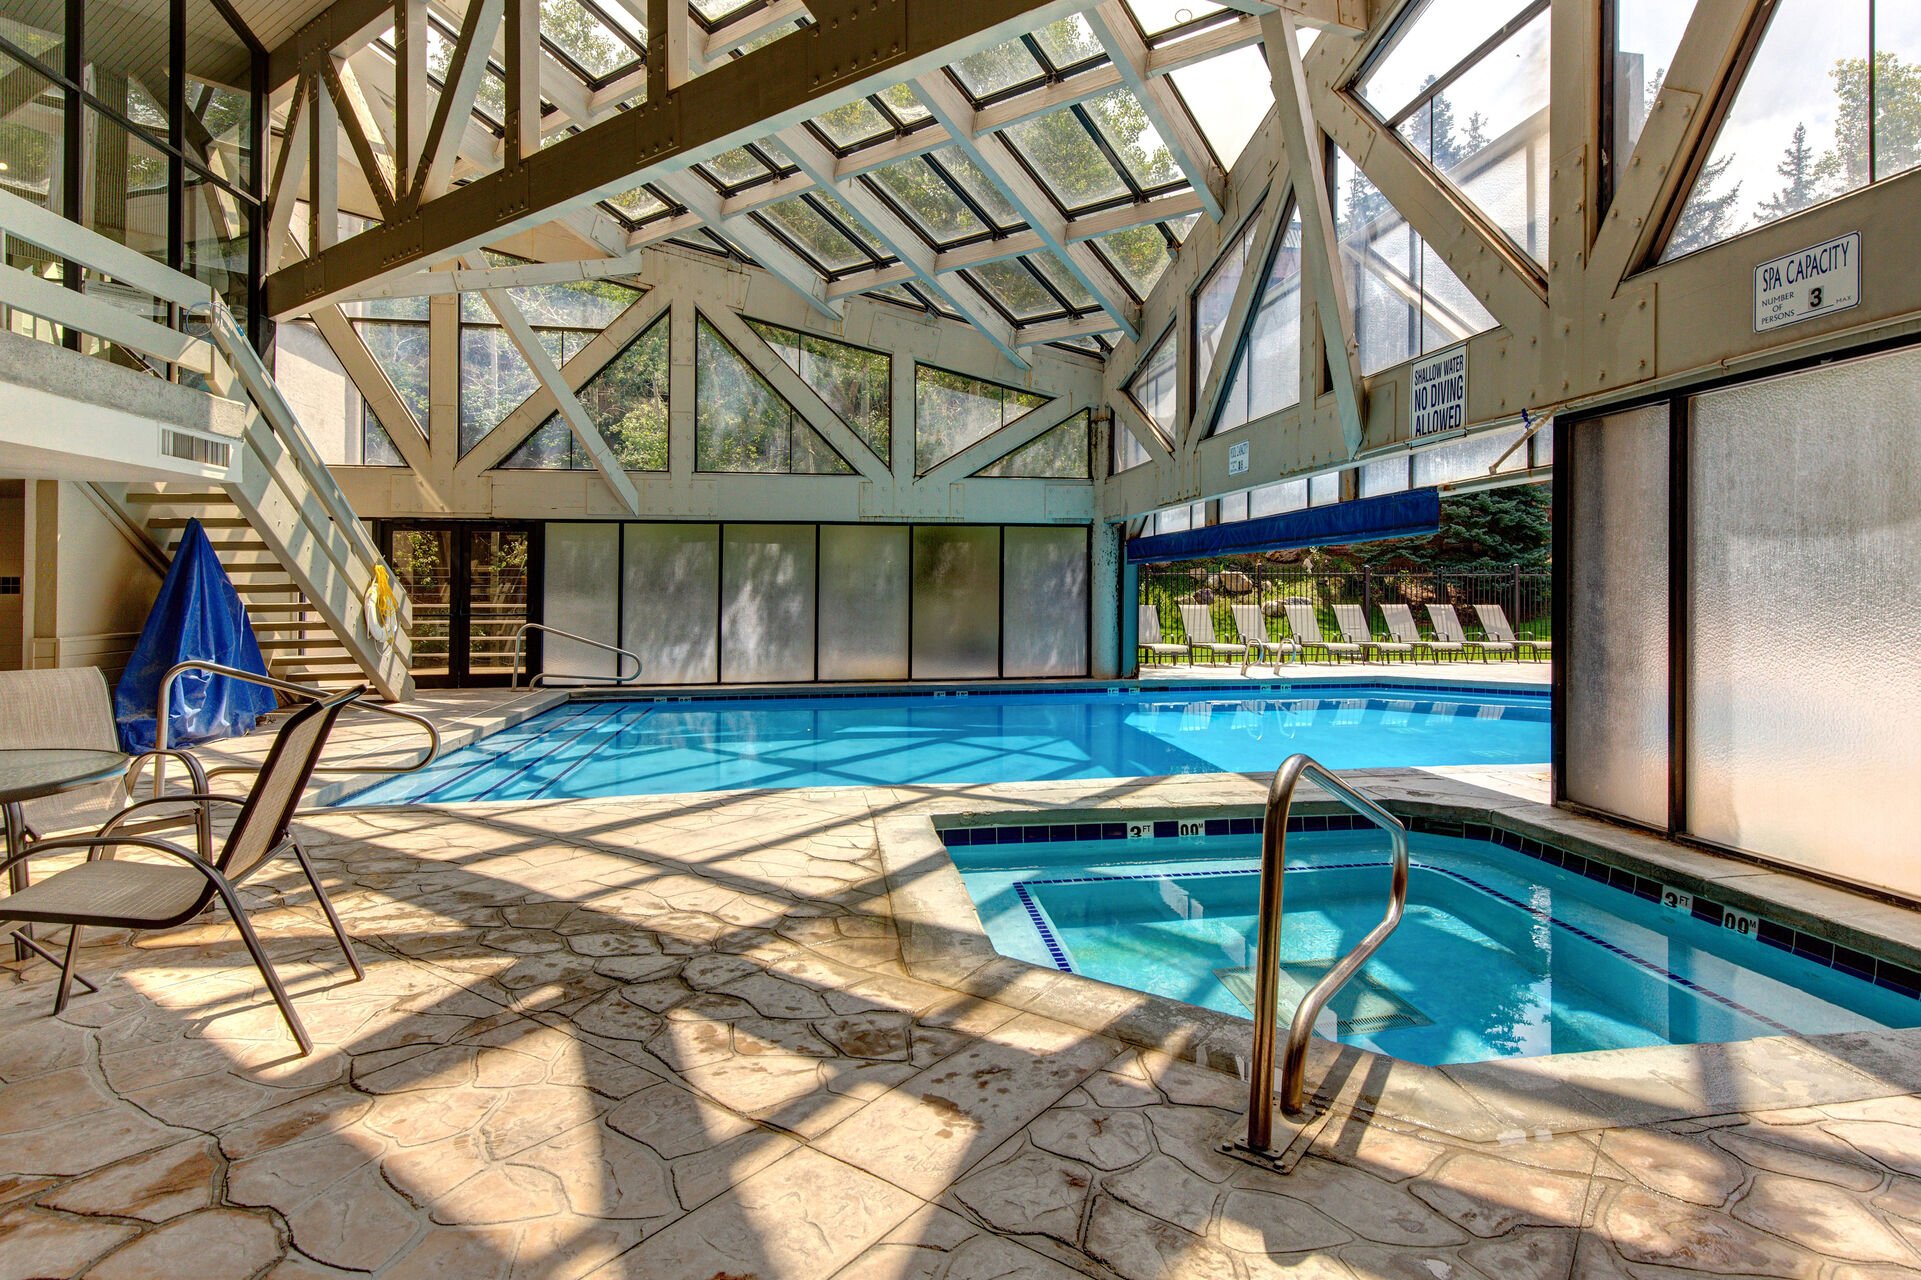 Communal indoor/outdoor. pool and hot tub